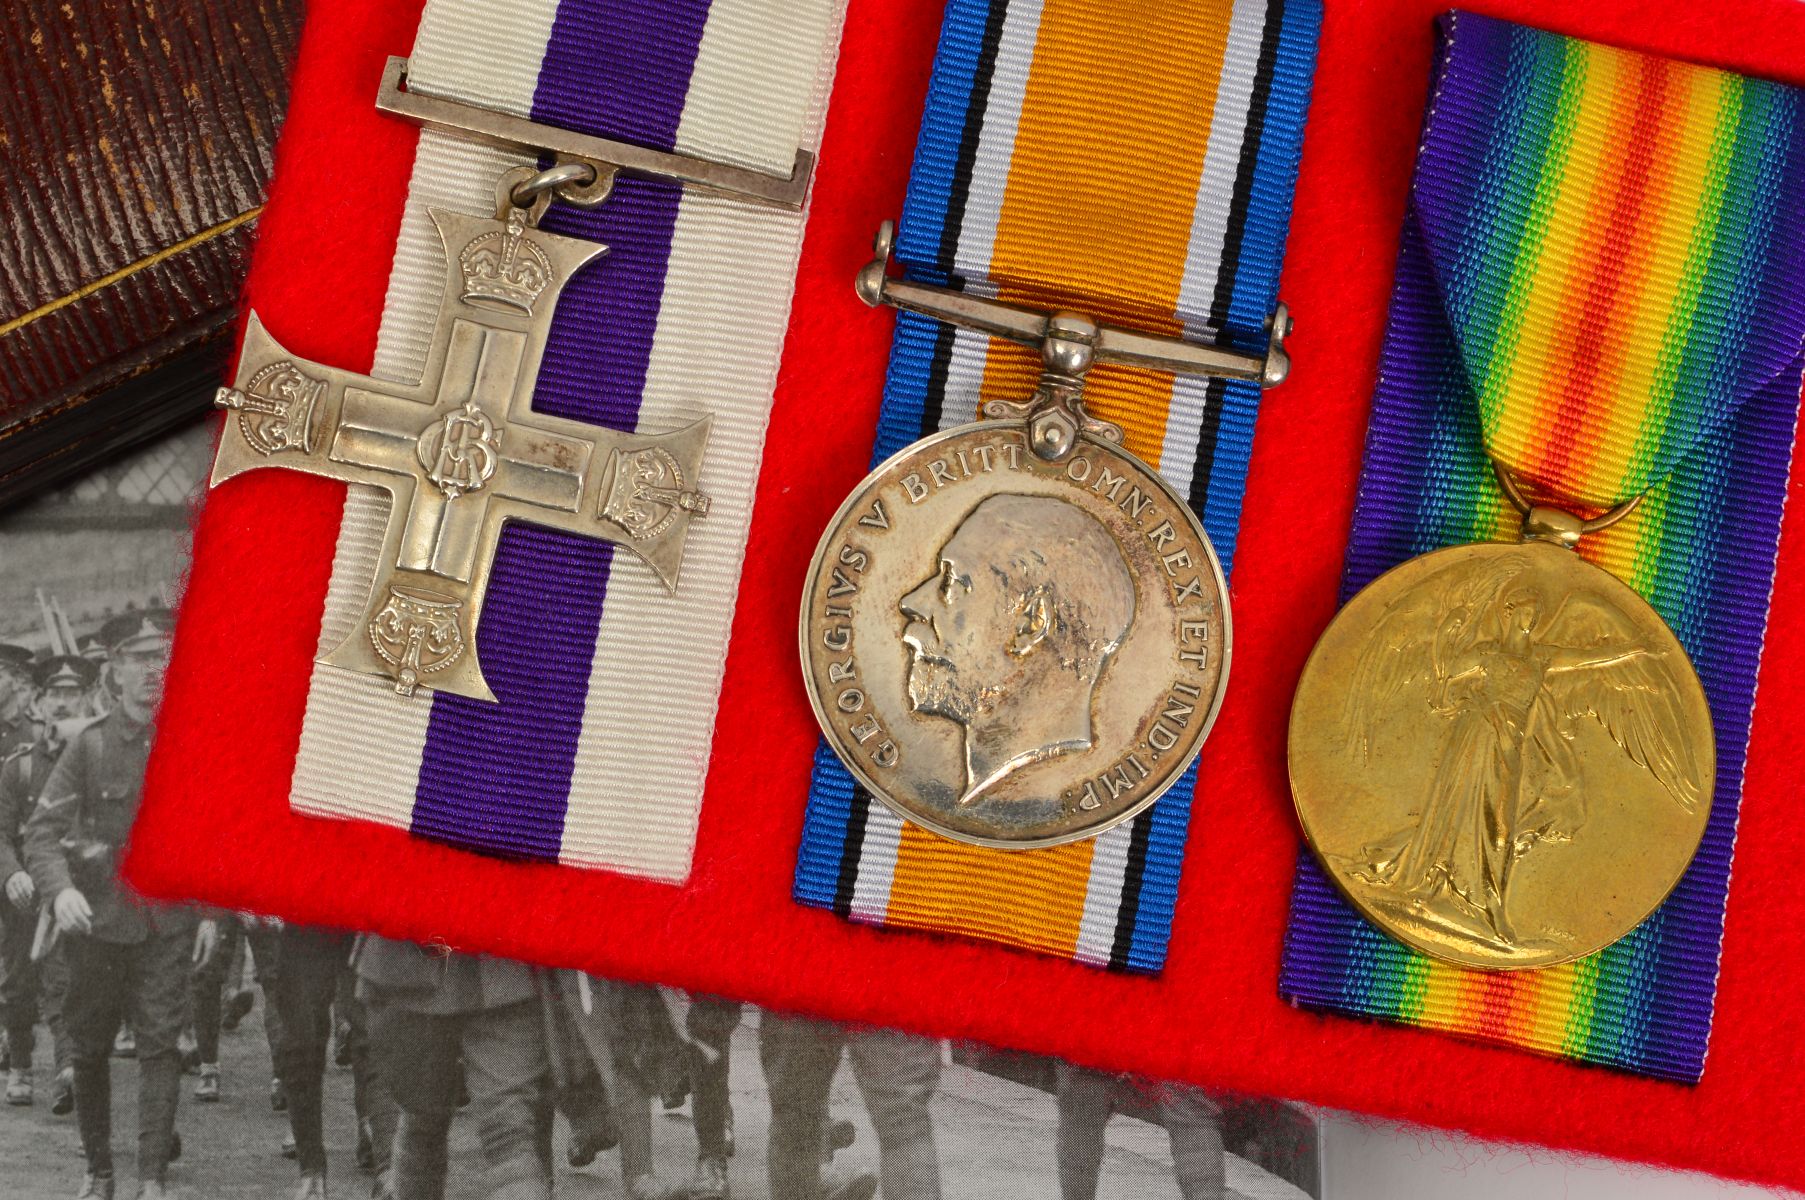 A WWI M.C. GALLANTRY GROUP OF THREE MEDALS TO AN OFFICER WHO SERVED WITH THE 28TH LONDON REGIMENT - Image 4 of 5